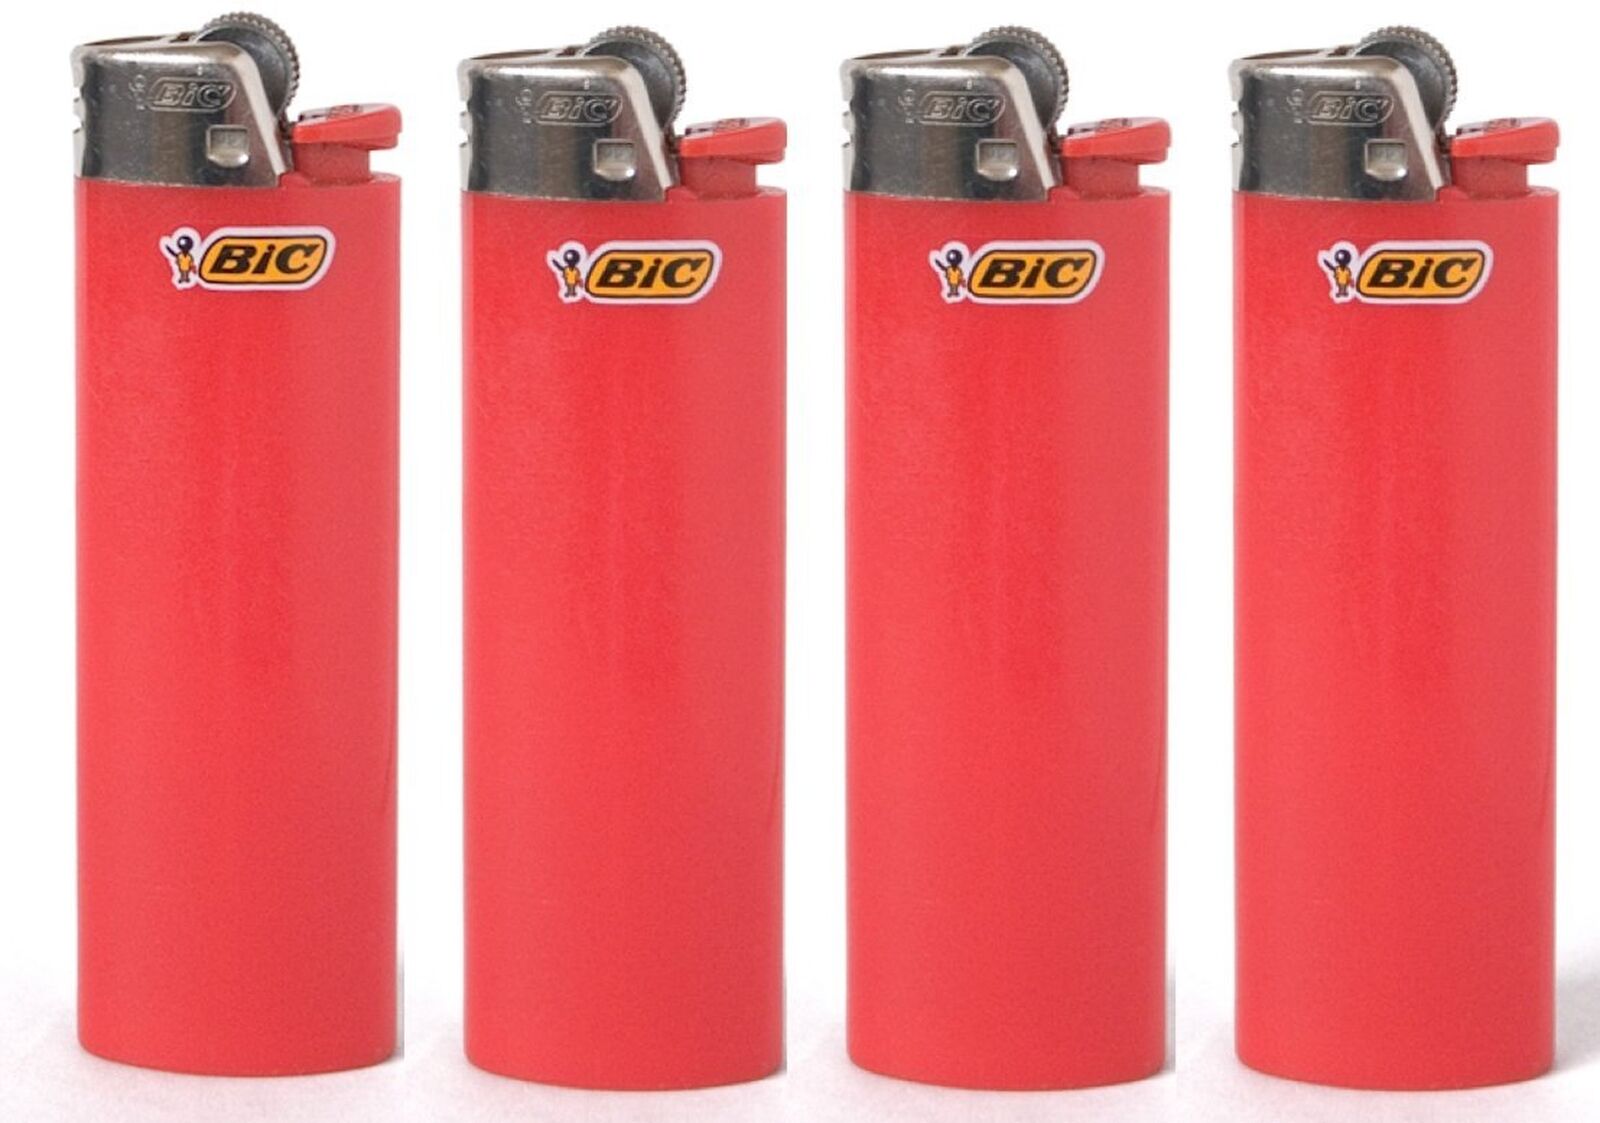 Lot of 4 Bic Red Classic Full Size Lighters New